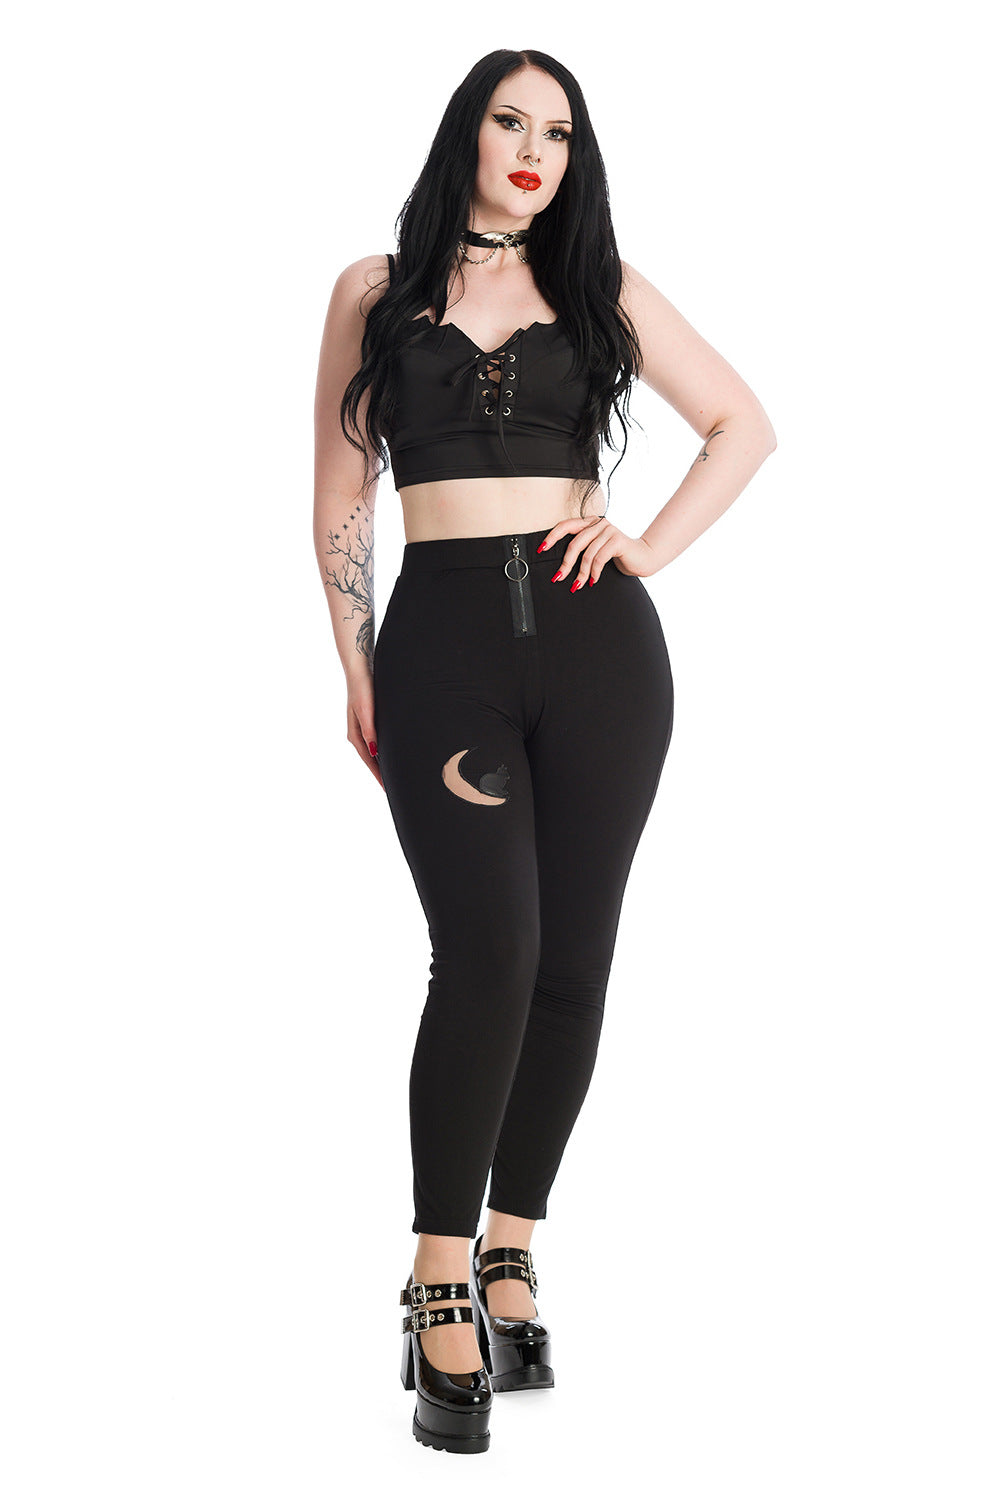 Alternative model in black crop top with corset detail and high waisted leggings with moon mesh detailing